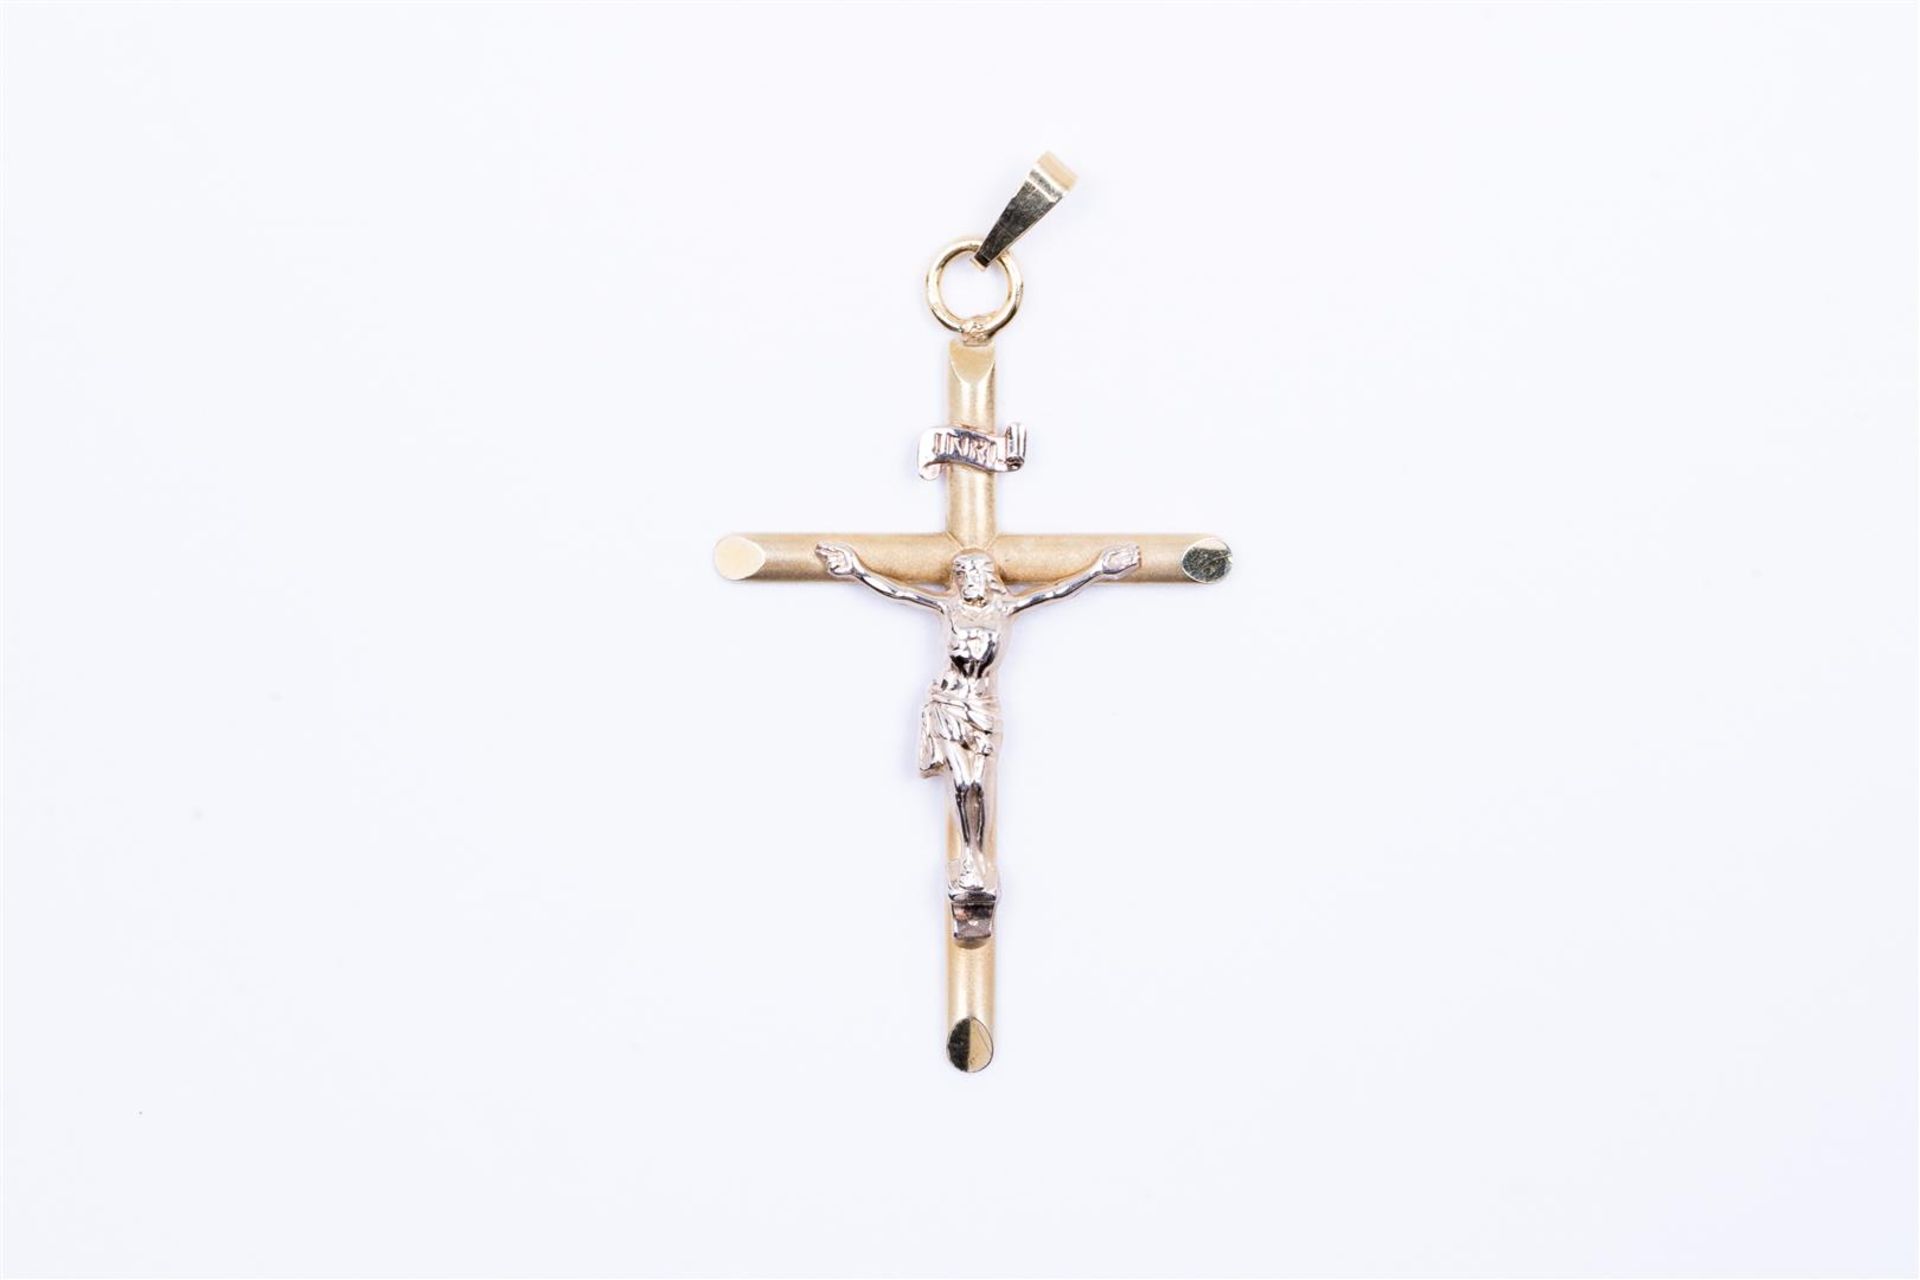 14kt bicolor gold cross pendant.
The cross is beautifully finished with great attention to detail. J